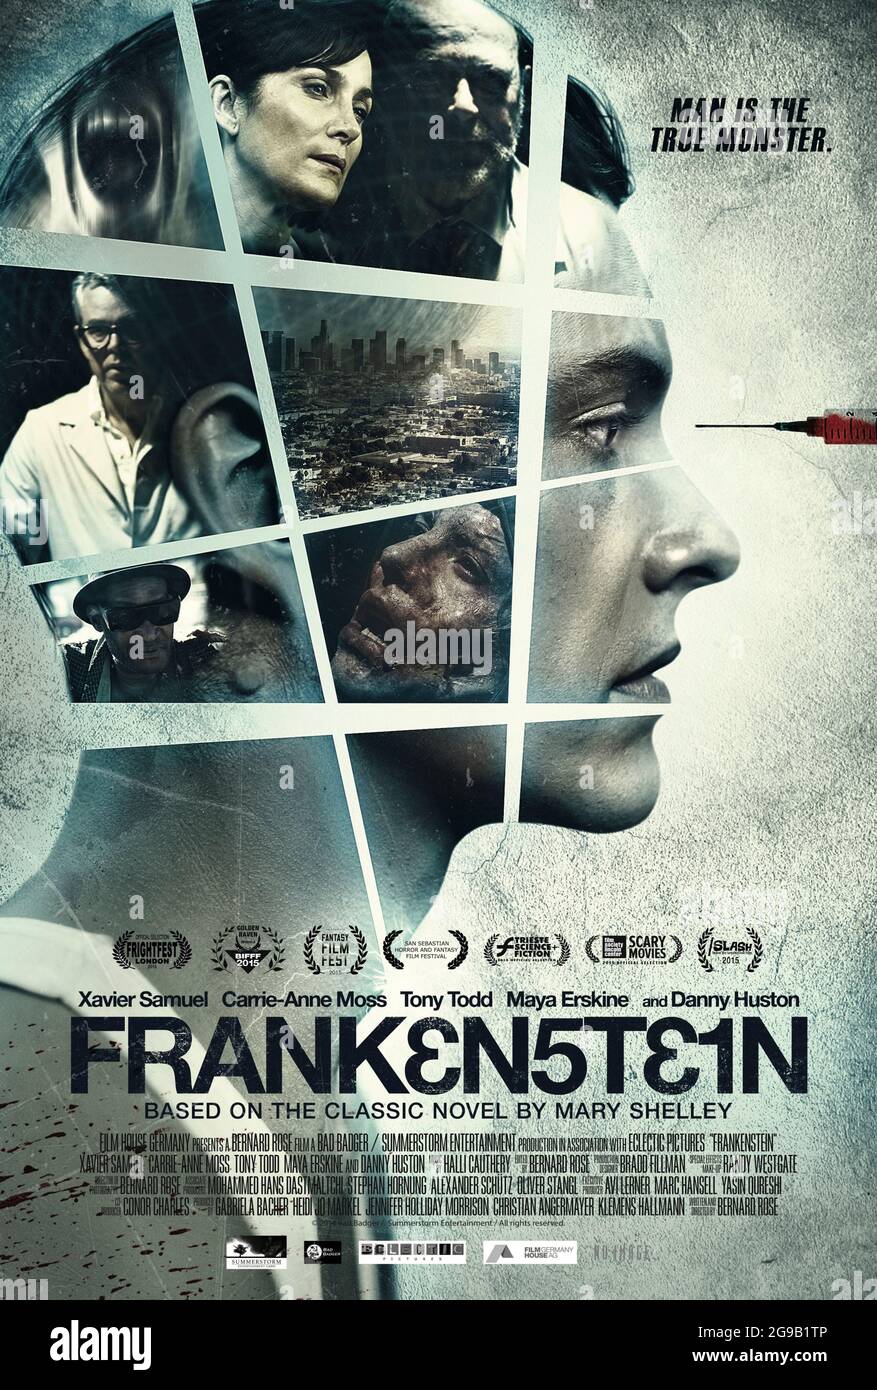 Frankenstein (2015) directed by Bernard Rose and starring Xavier Samuel, Carrie-Anne Moss and Danny Huston. Modern adaptation of Mary Shelley's classic novel about a scientist who creates an artificial man trying to find his way in a world that is new to him. Stock Photo